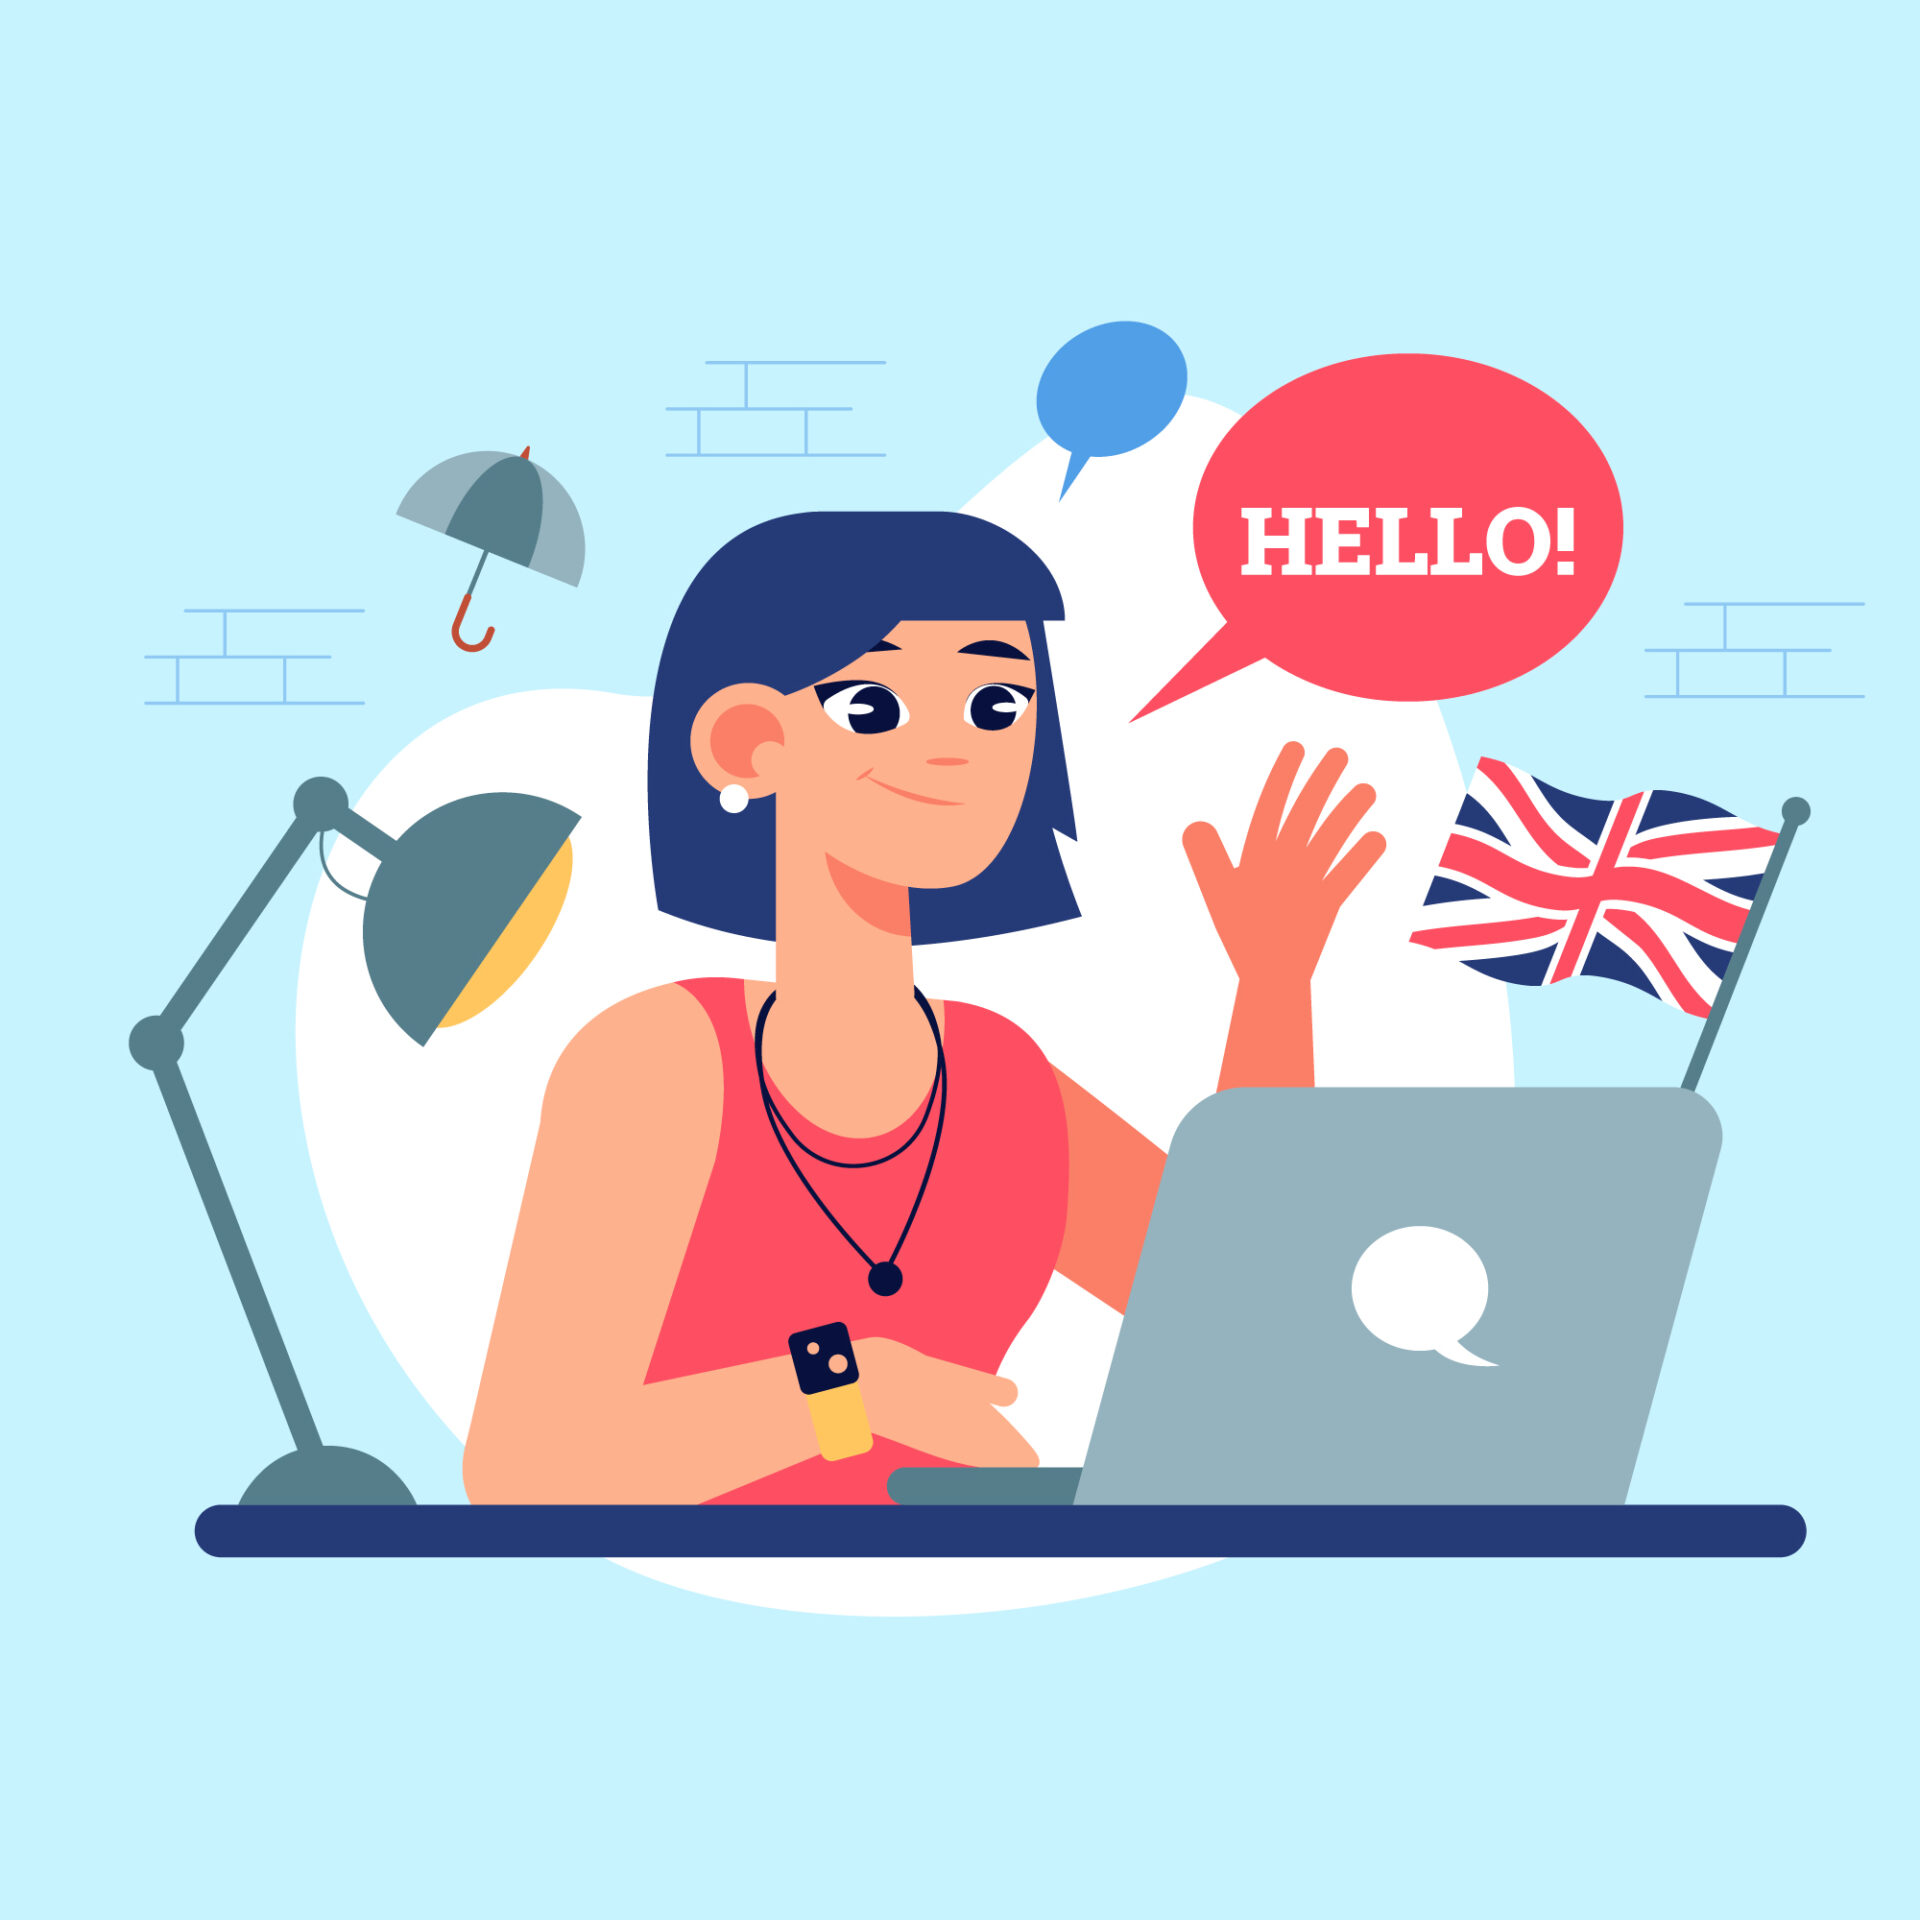 This vector demonstrates the friendly appeal of outsourcing customer support in English, helping global English-speaking customers to find the tailorable support they need, leading to global service excellence that brings about long-term market dominance.